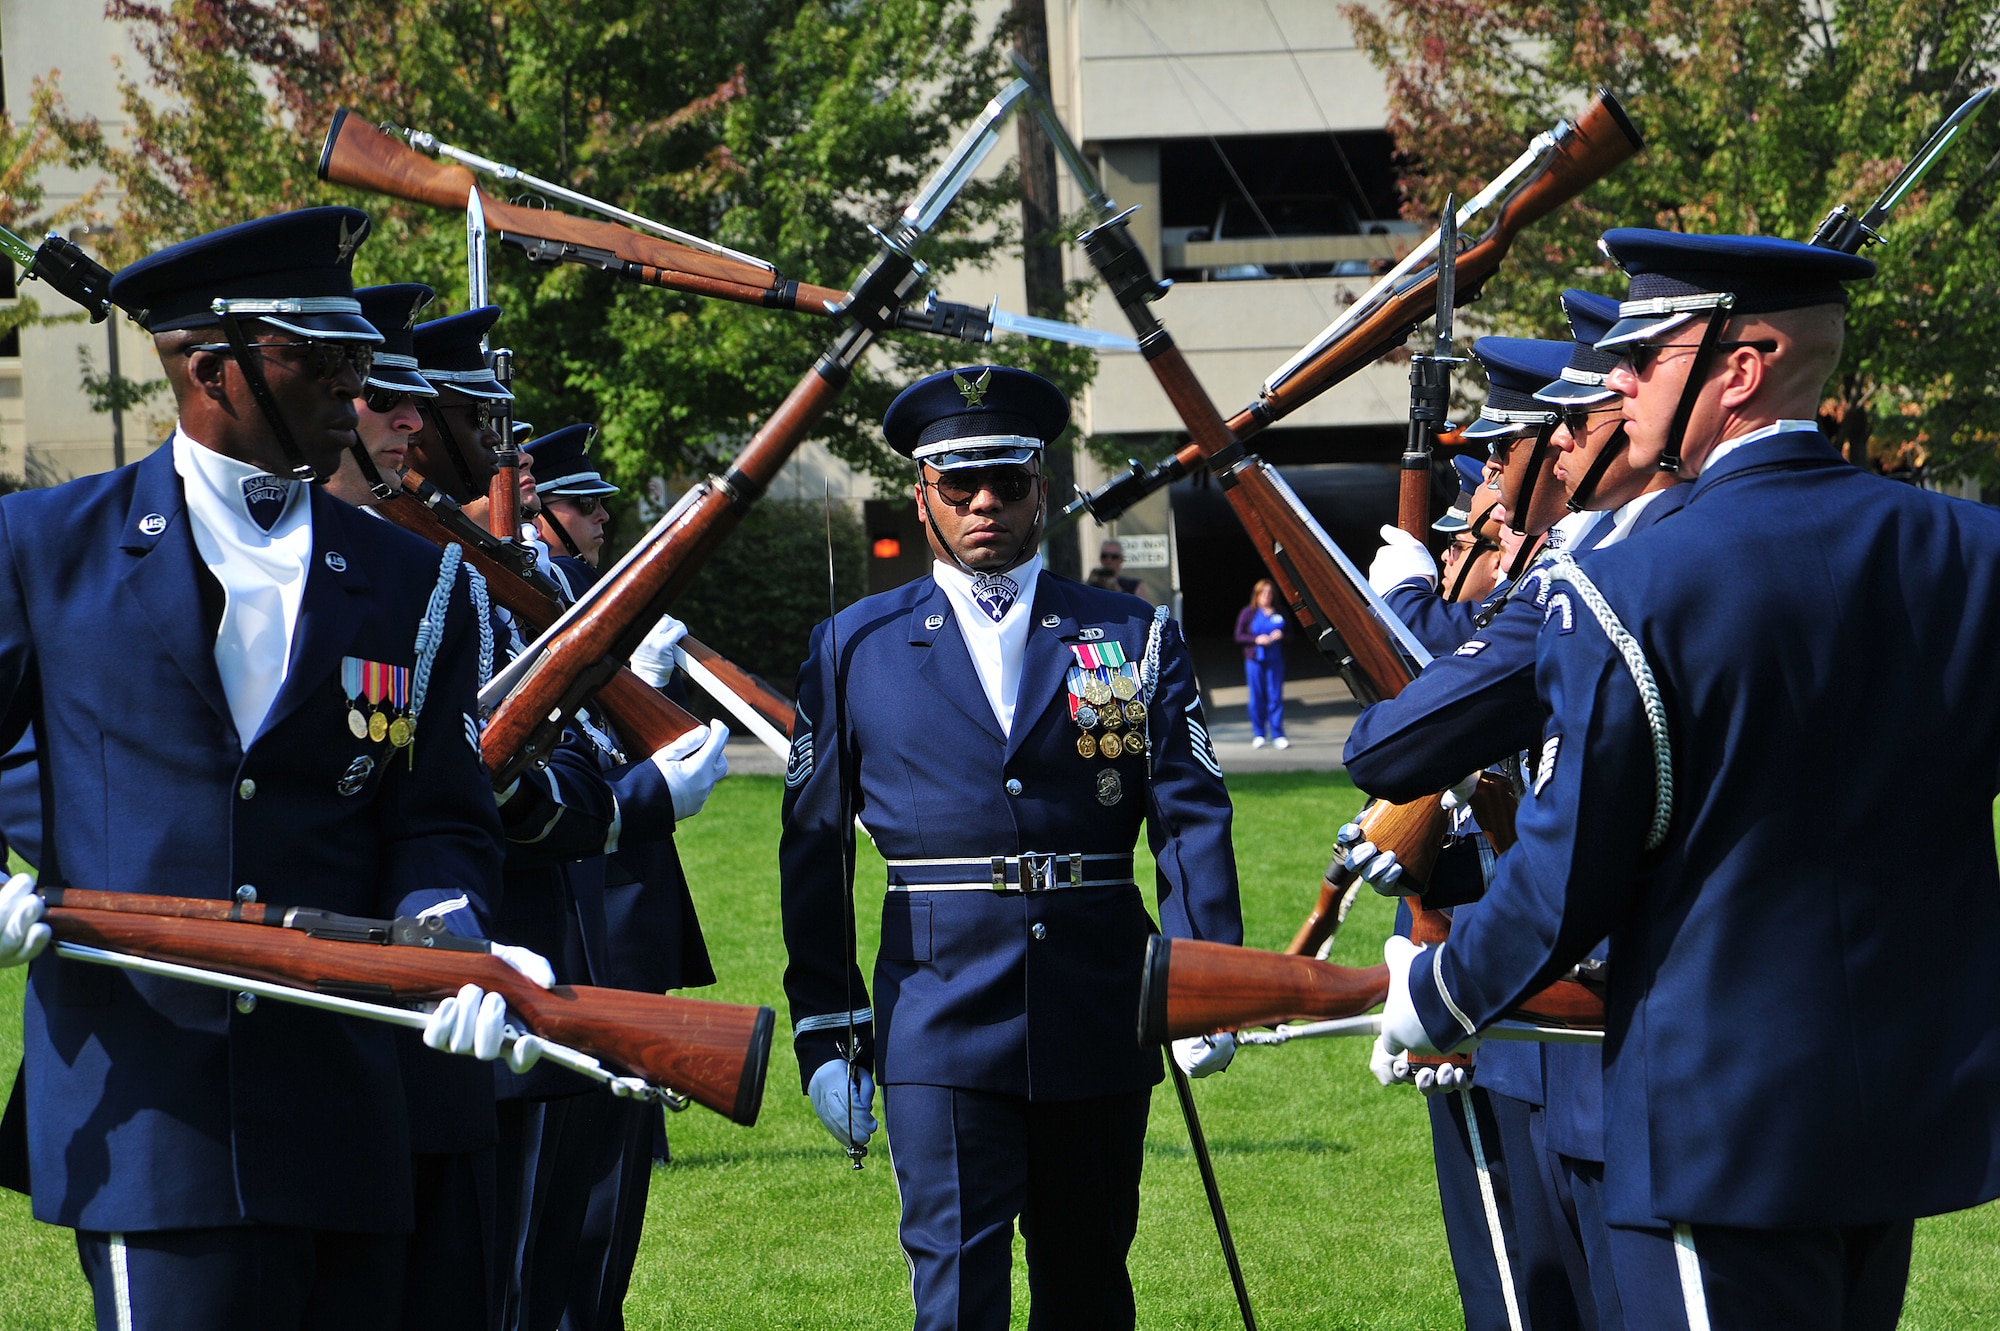 Master Sgt. Whitfield Jack, U.S. Air Force Honor Guard NCO in-charge, marches through the rifle gauntlet, considered to be a very dangerous maneuver, during a performance at the Lewis and Clark High School, Spokane, Wash., Sept. 19, 2012. The vision of the USAF Honor Guard is to ensure a legacy of Airmen who, promote the mission, protect the standards, perfect the image and preserve the heritage. (U.S. Air Force photo by Airman 1st Class Taylor Curry)